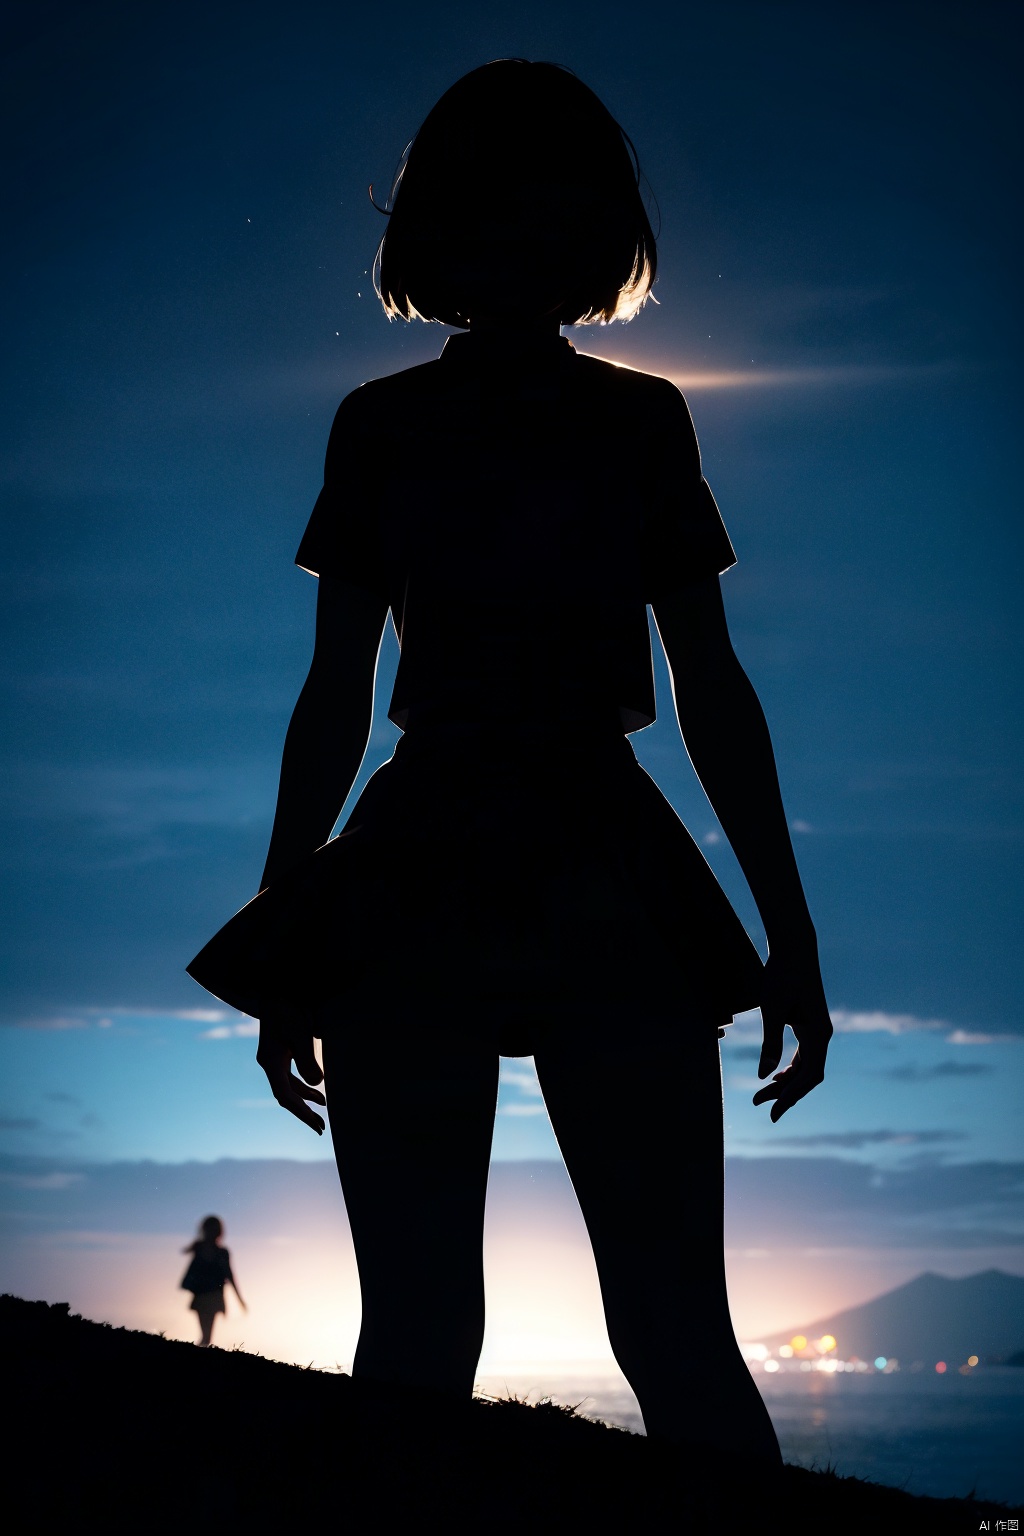 A girl, solo, underwear, miniskirt (silhouette in the dark, black figure), vaguely saw a hazy figure. ,GMajic